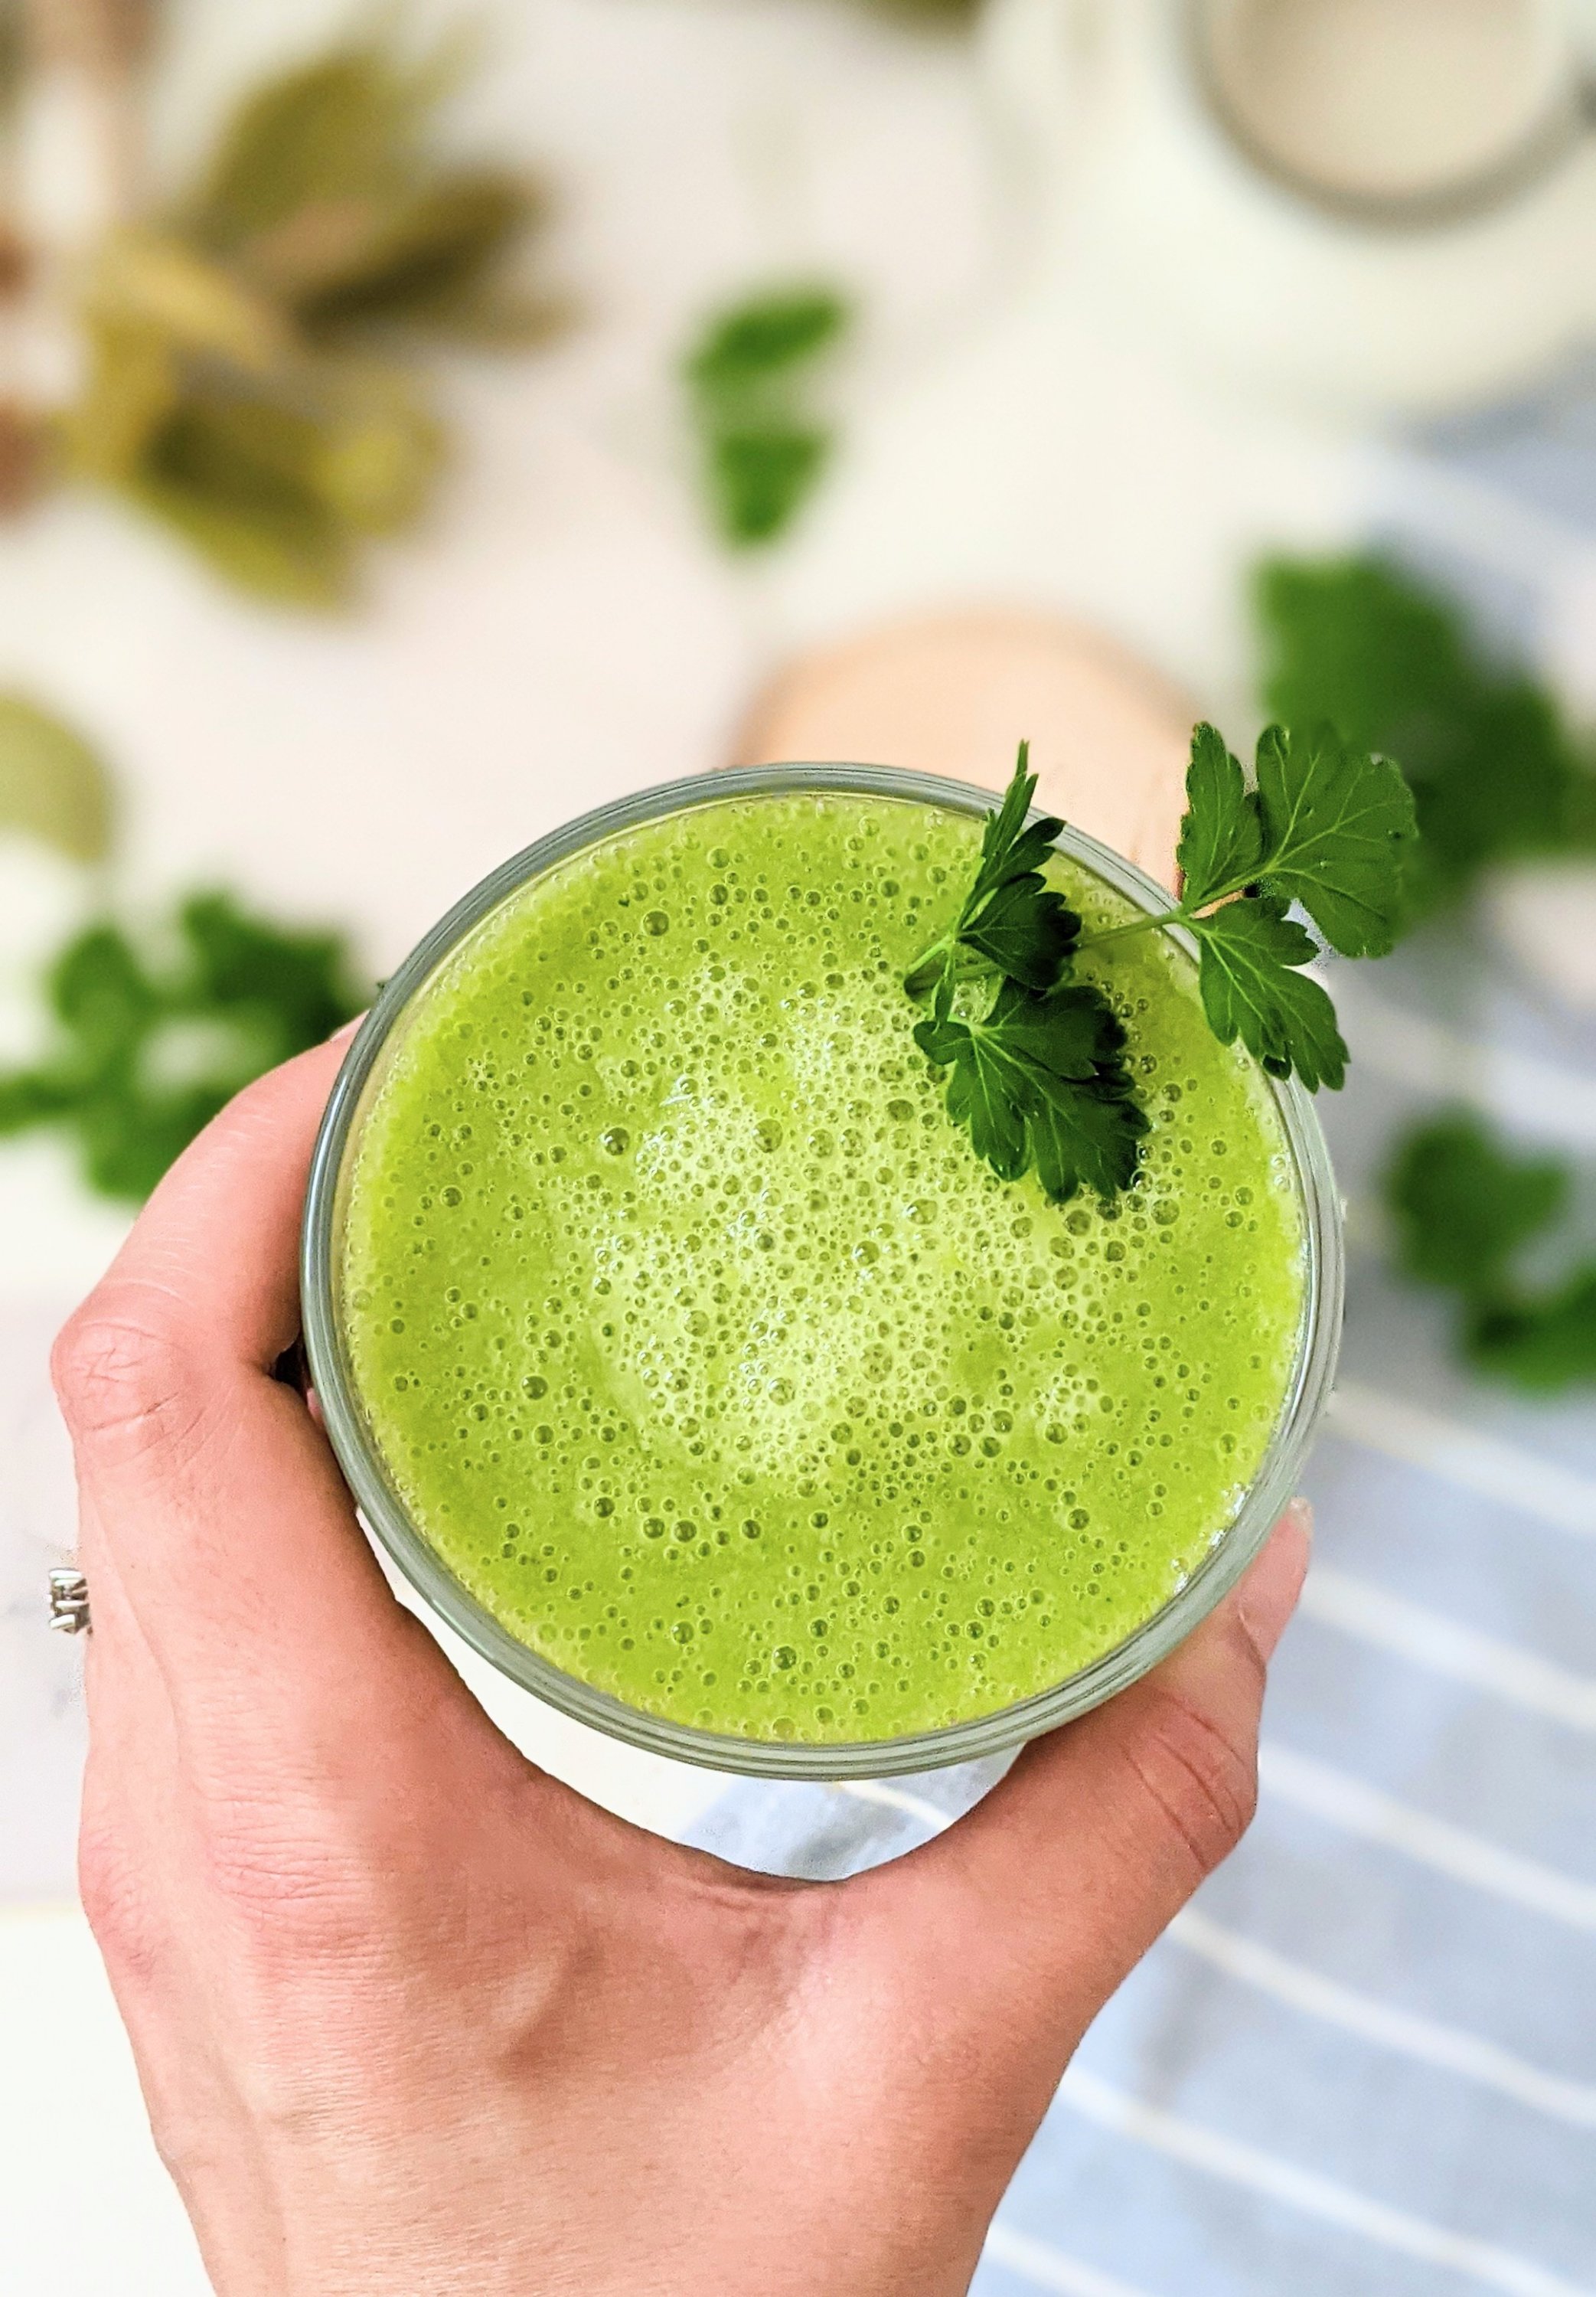 parsley smoothie benefits with orange gut protein powder and frozen kale smoothies with frozen mangoes for breakfast with banana and chia seeds